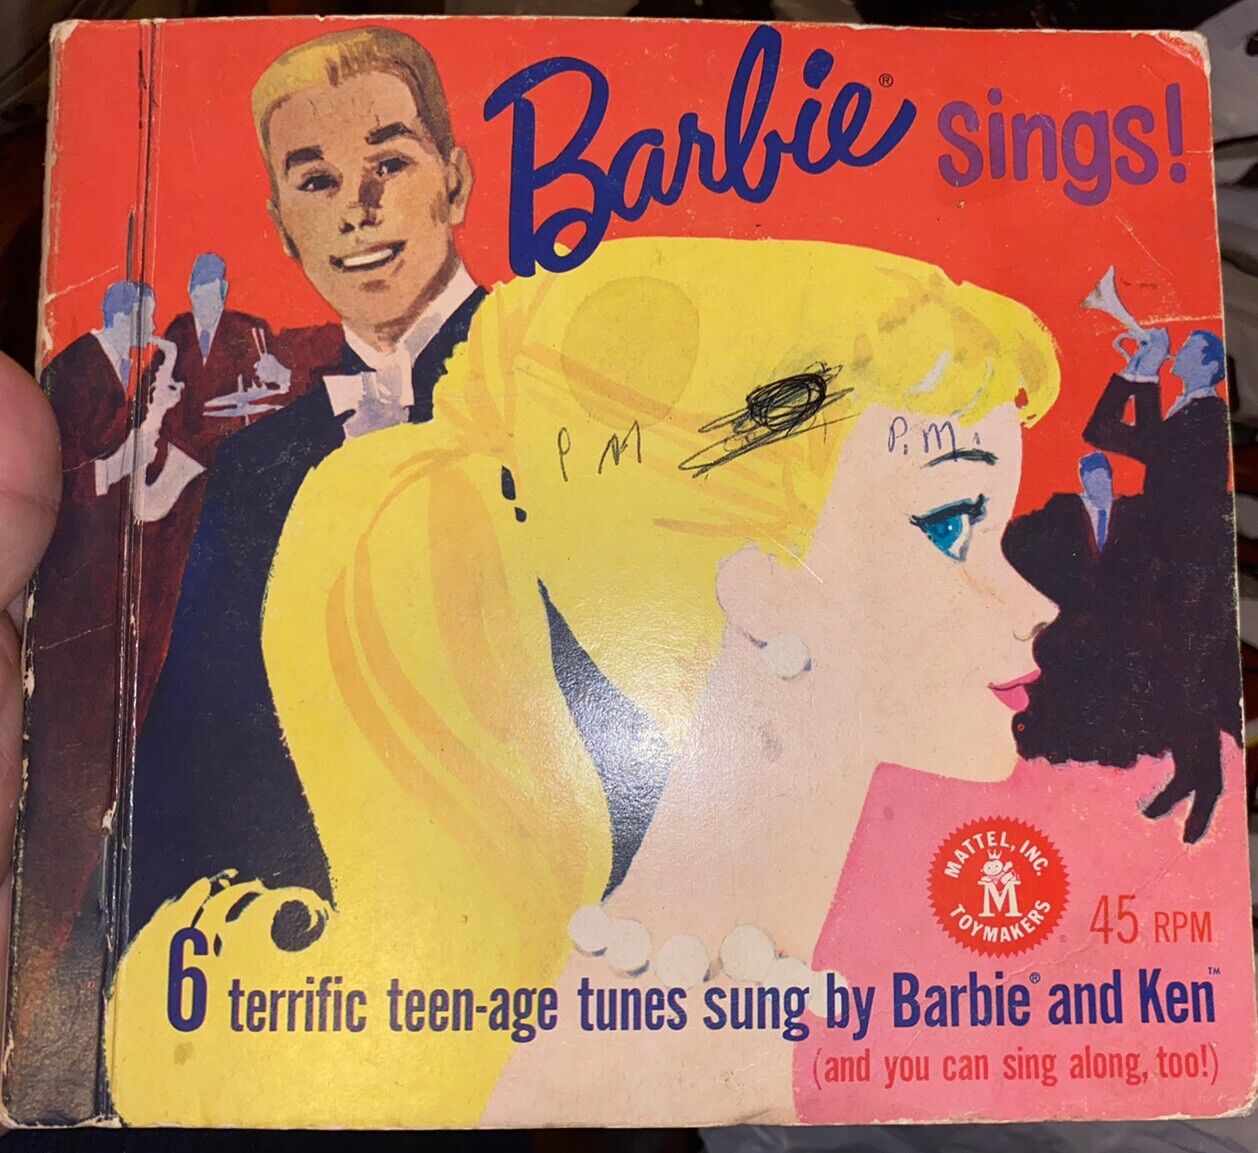 1961 Vintage Mattel Barbie Sings Book With (3) 45 RPM Records & 6 Tunes